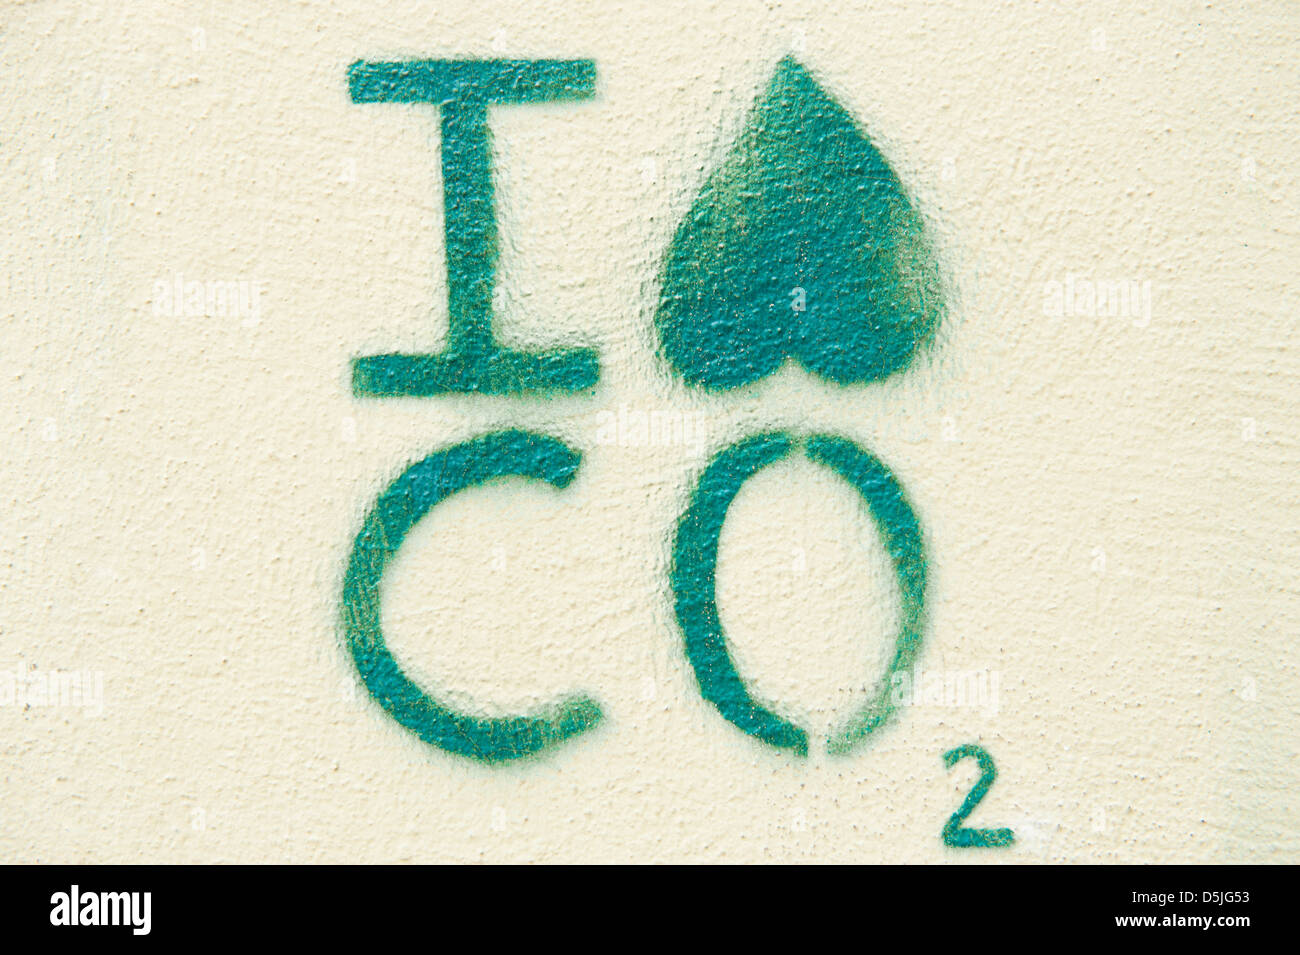 Graffiti on a wall expressing dislike or hatred of CO2 ('I hate CO2'); a green or environmental statement Stock Photo